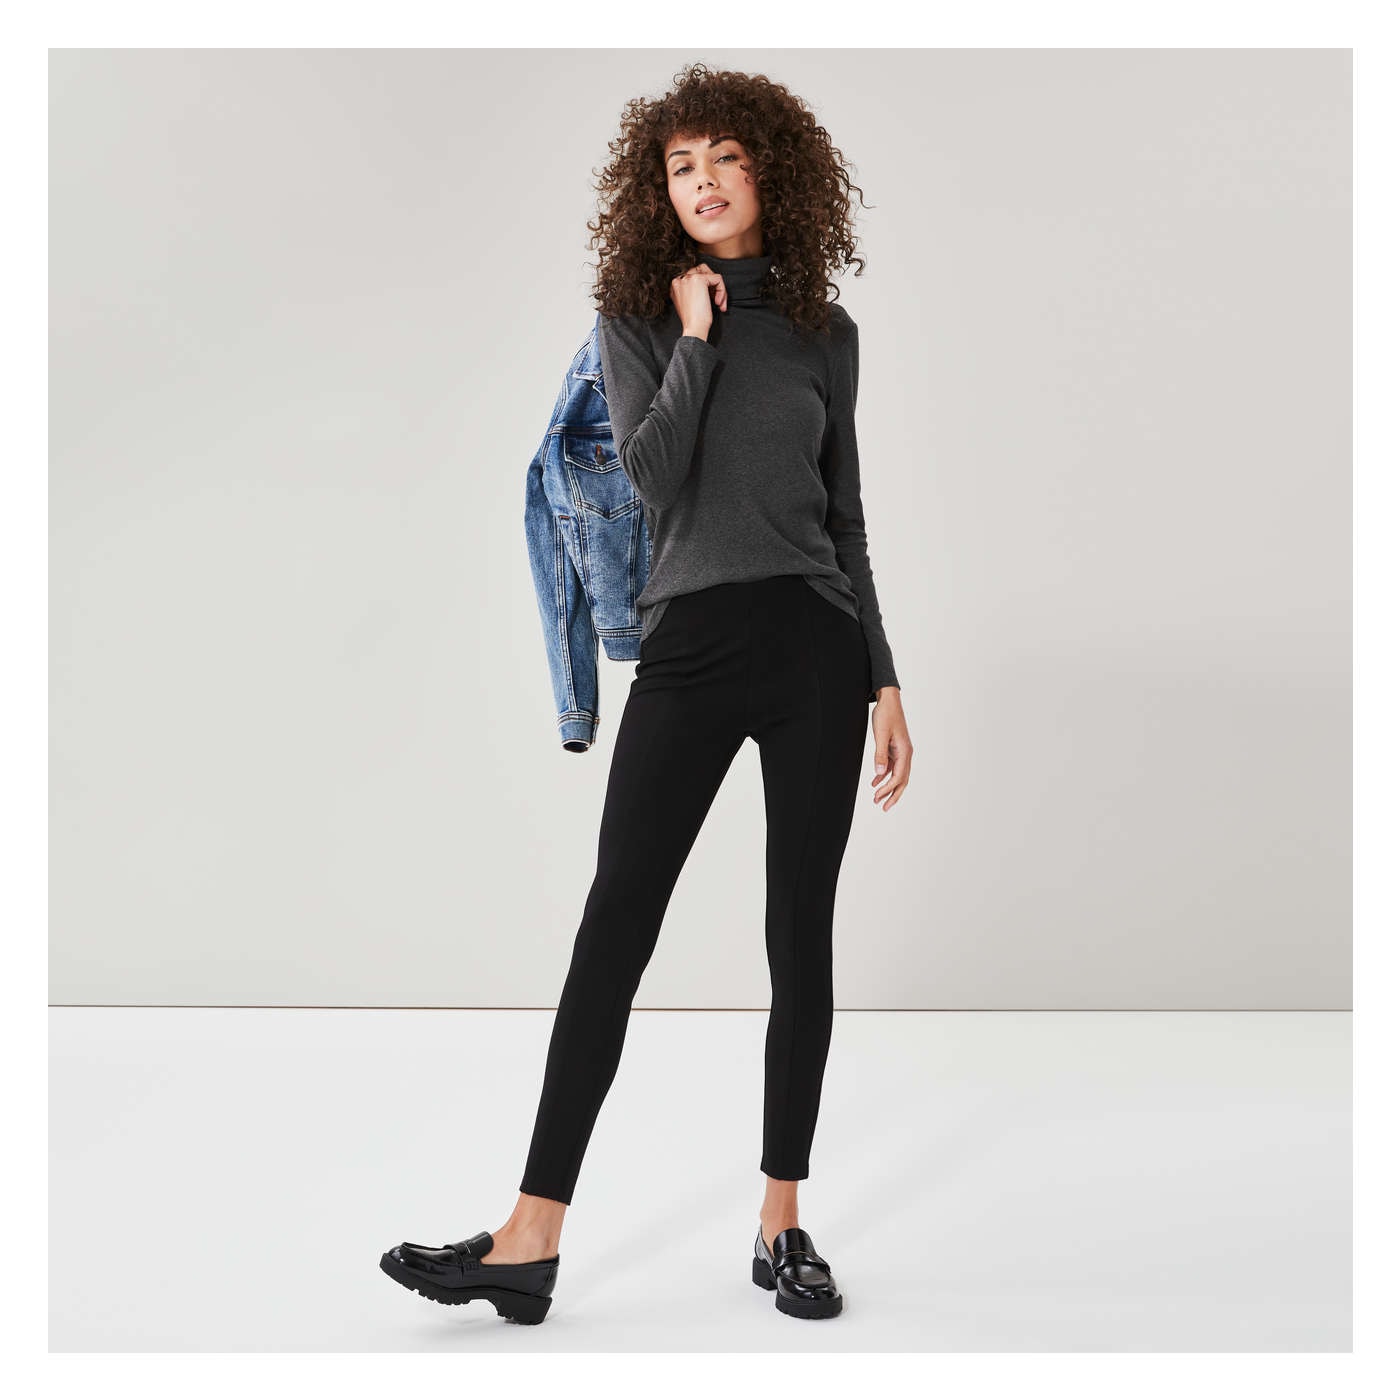 The Row Woolworth Stretch-ponte Leggings - Black - ShopStyle